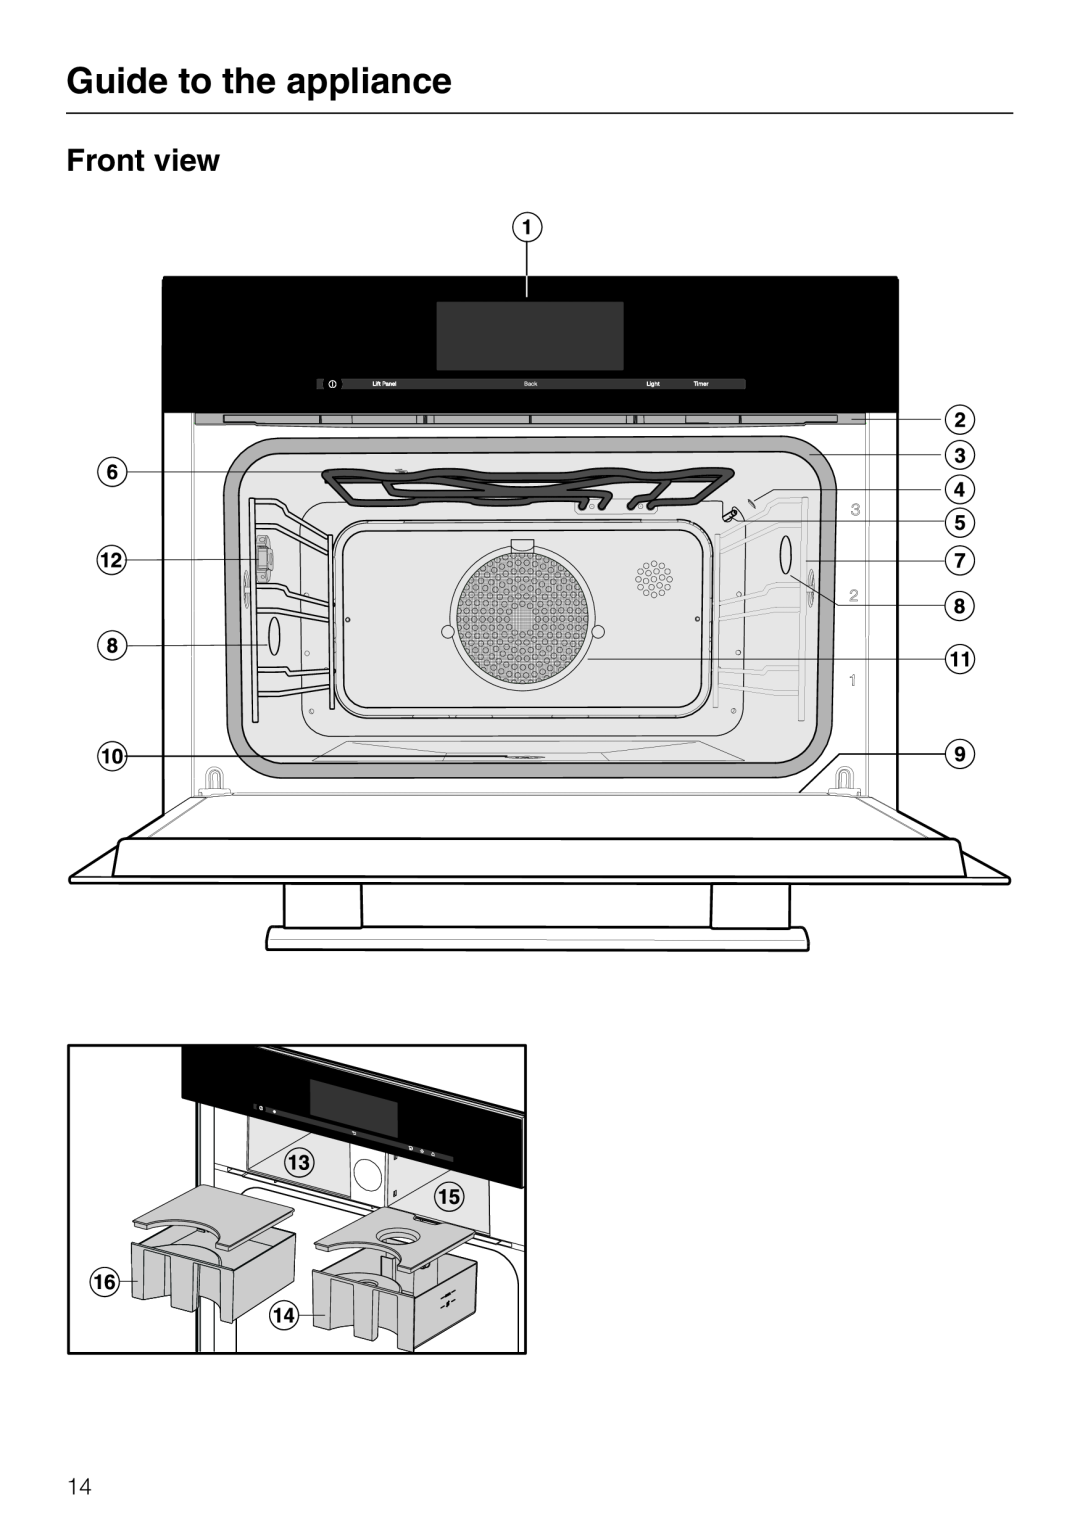 Miele 09 855 050 installation instructions Guide to the appliance, Front view 